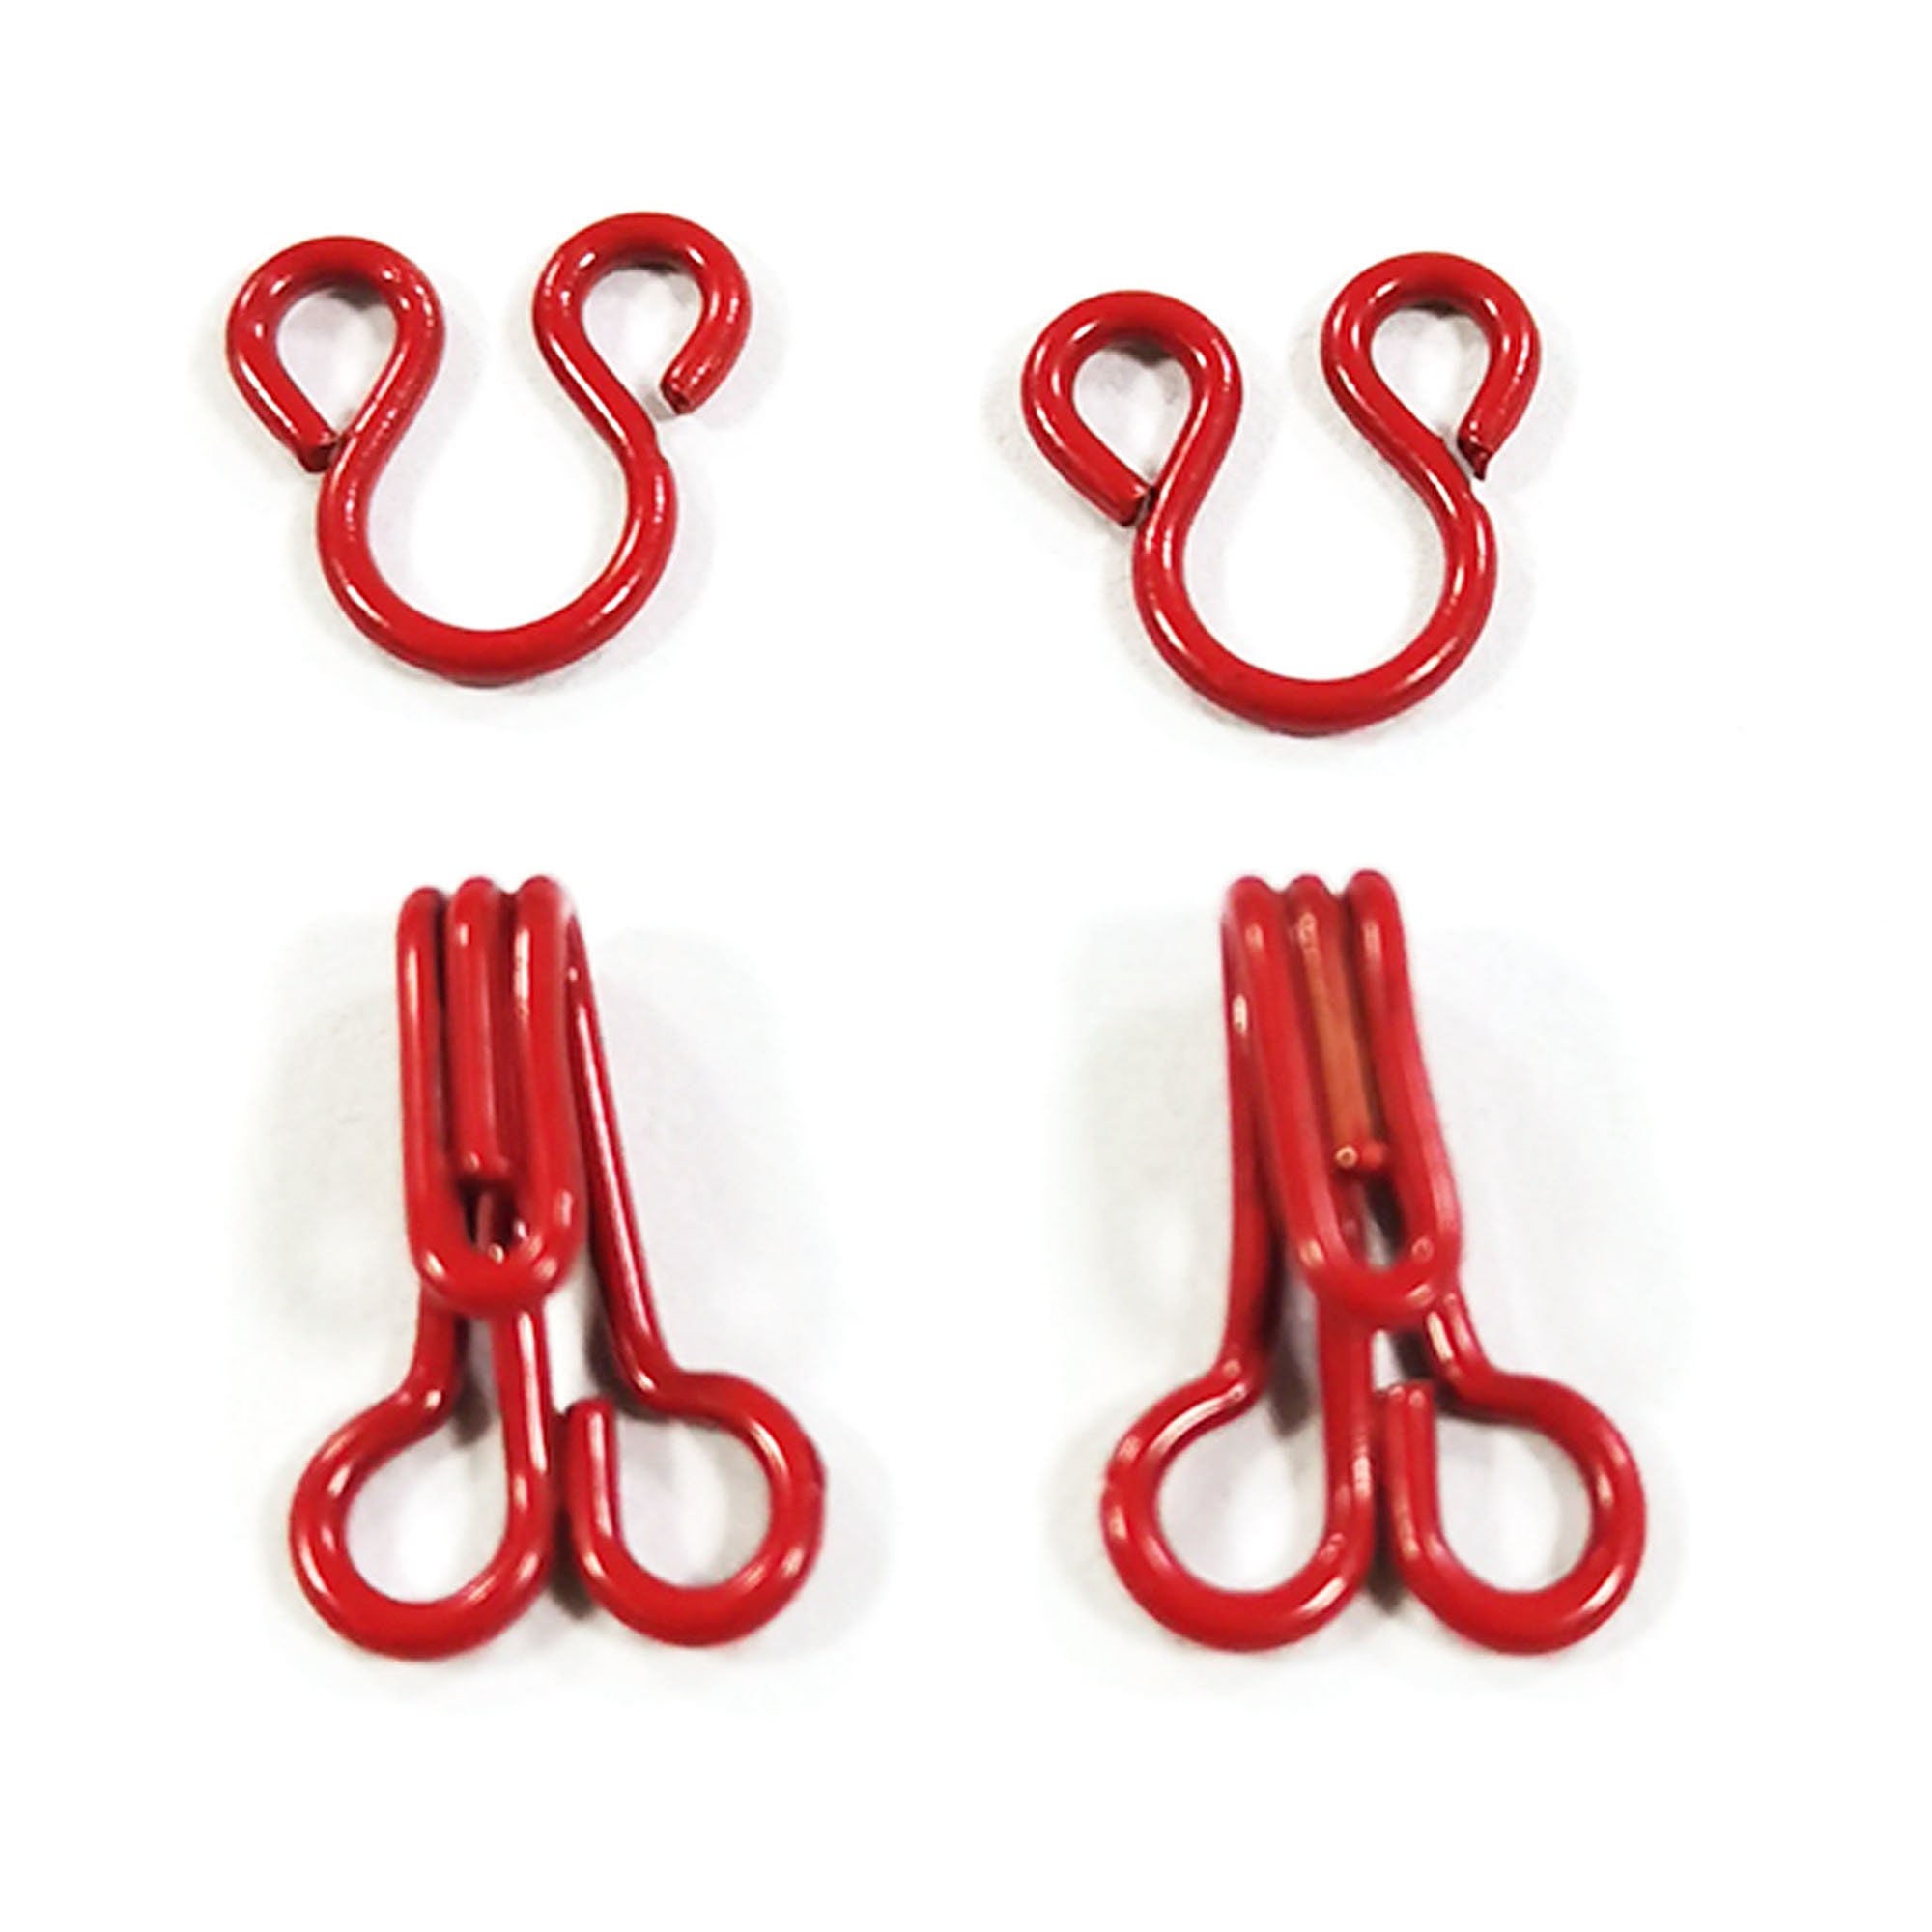 50 Sets Red Hook Eye Closure Hook and Eye Clasp Clothing Hook Sewing Hook  Copper Hook and Eye Sets Hook and Eyewx01 -  Canada